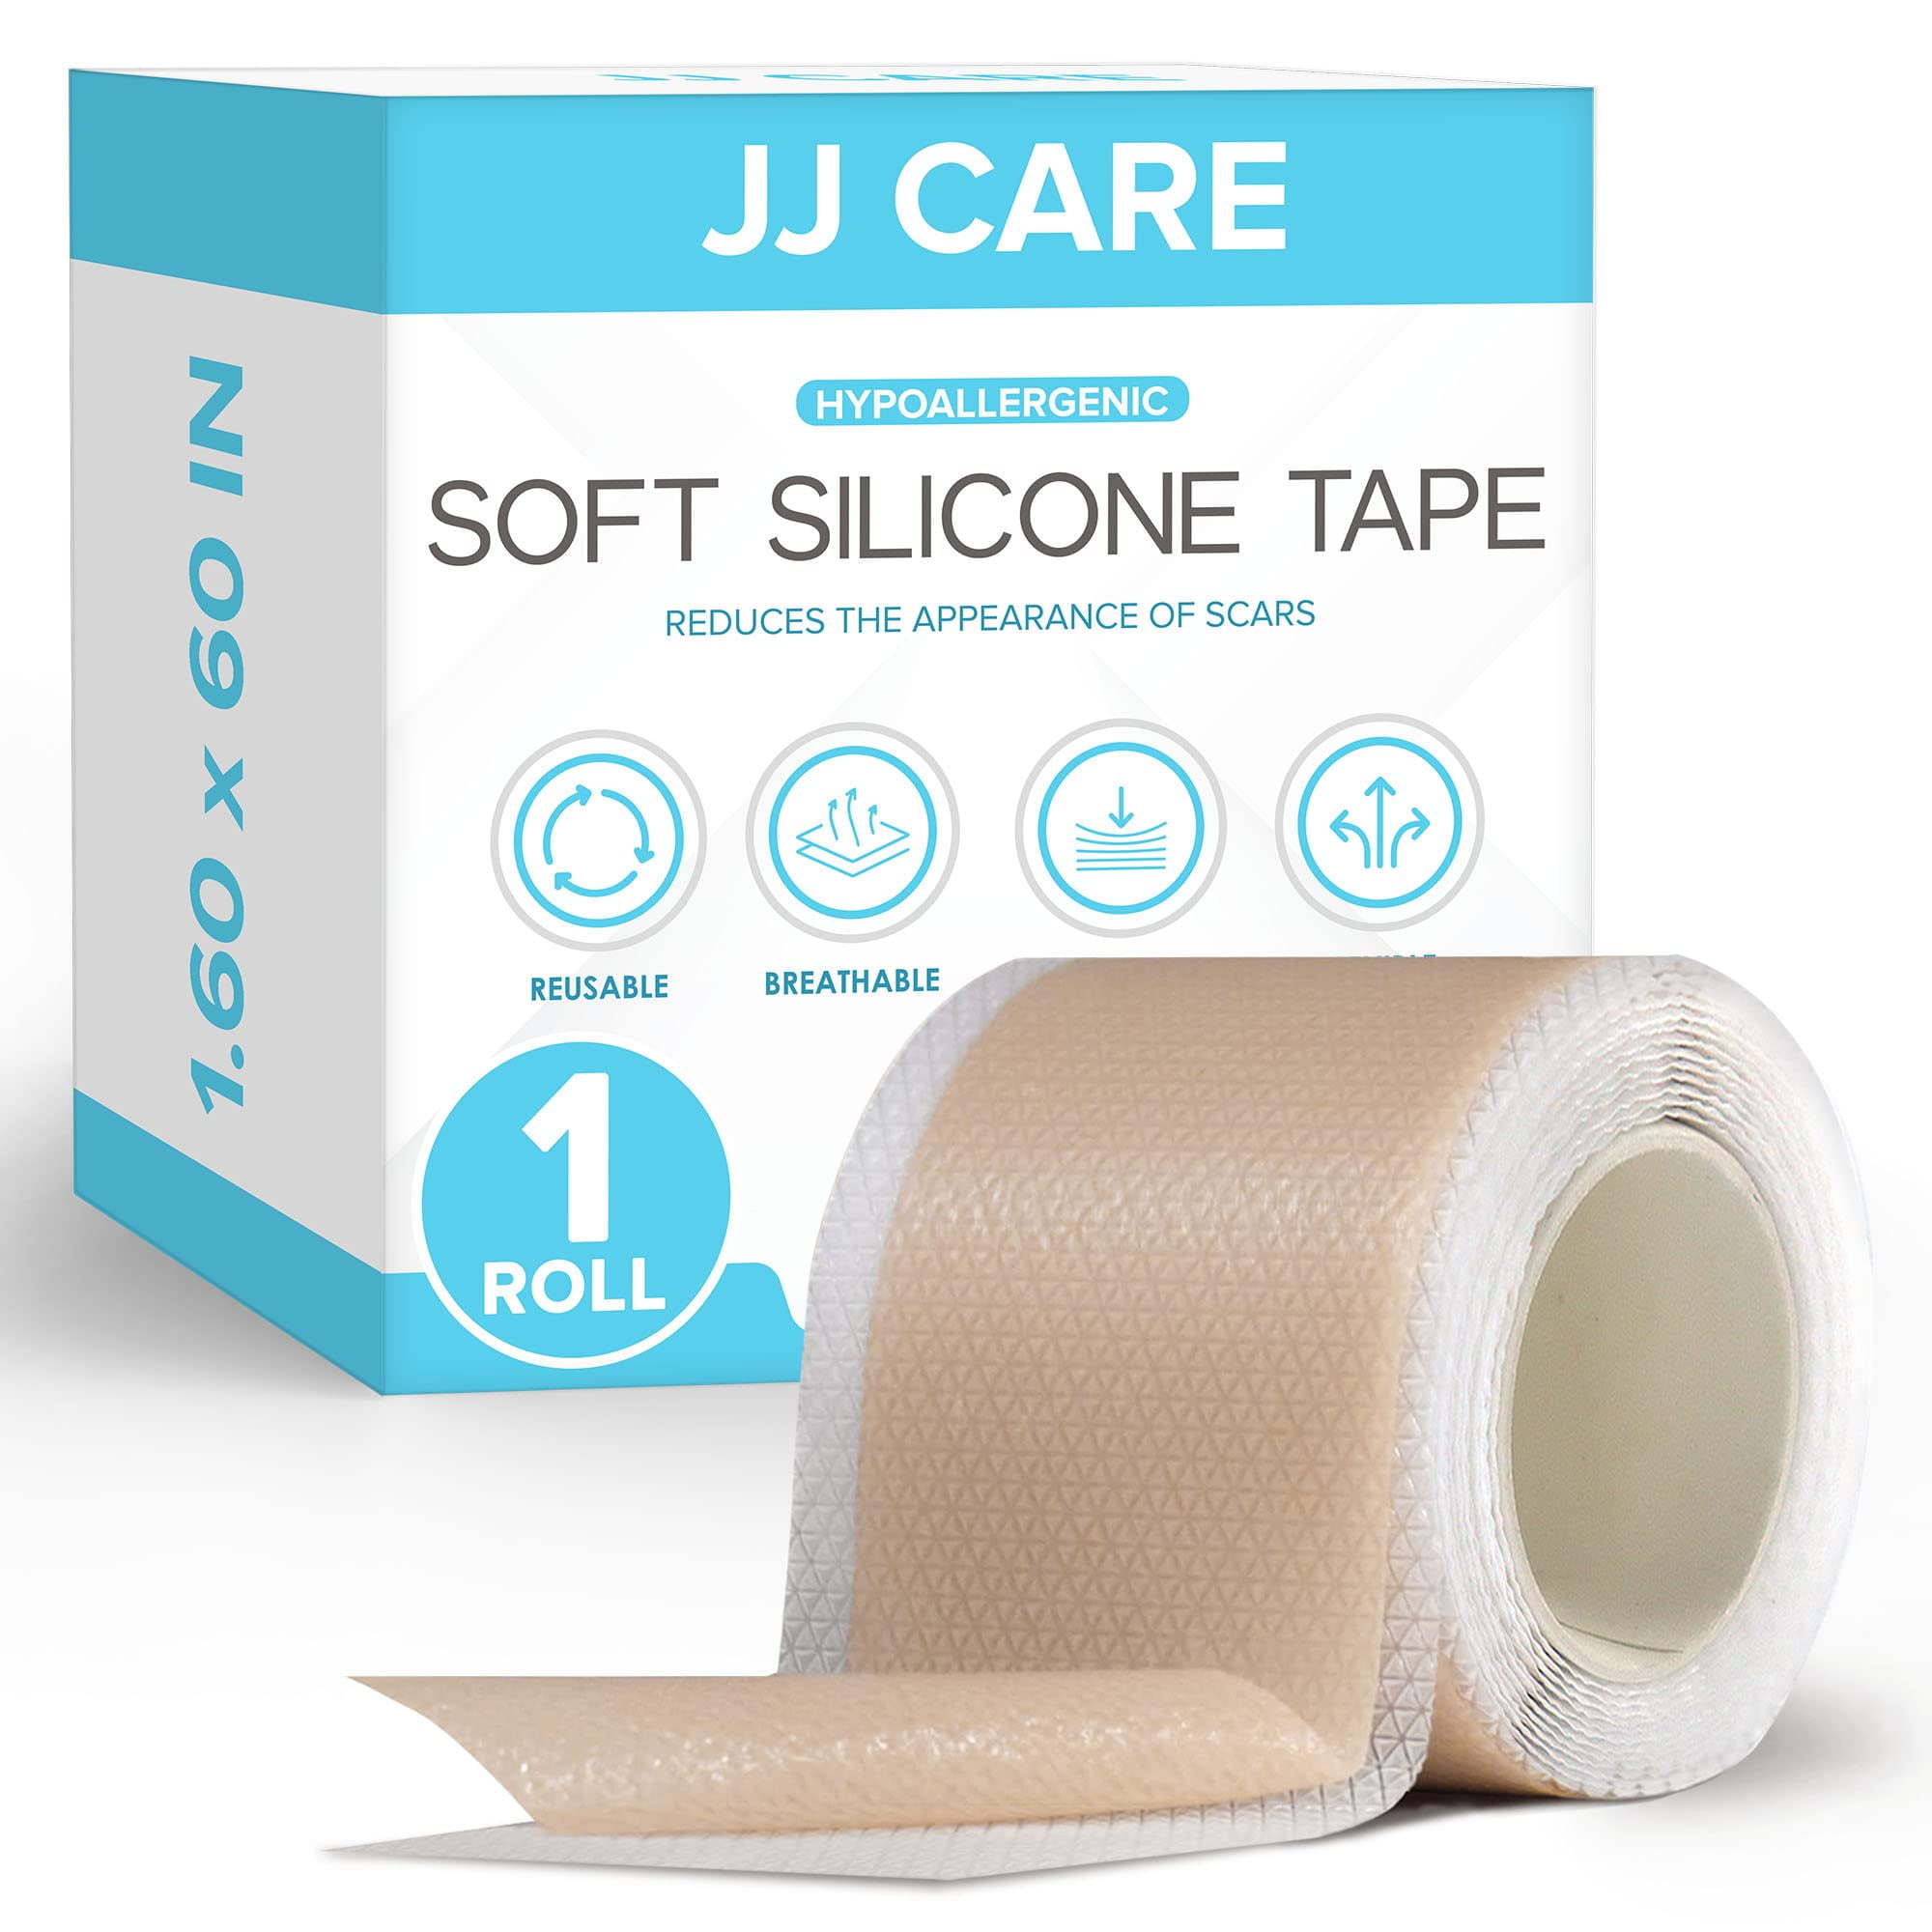 JJ CARE Soft Silicone Tape, 1.6” x 60” Flexible Silicone Scar Tape, Medical  Grade Silicone Strips for Scars, Washable & Reusable Scar Tape for